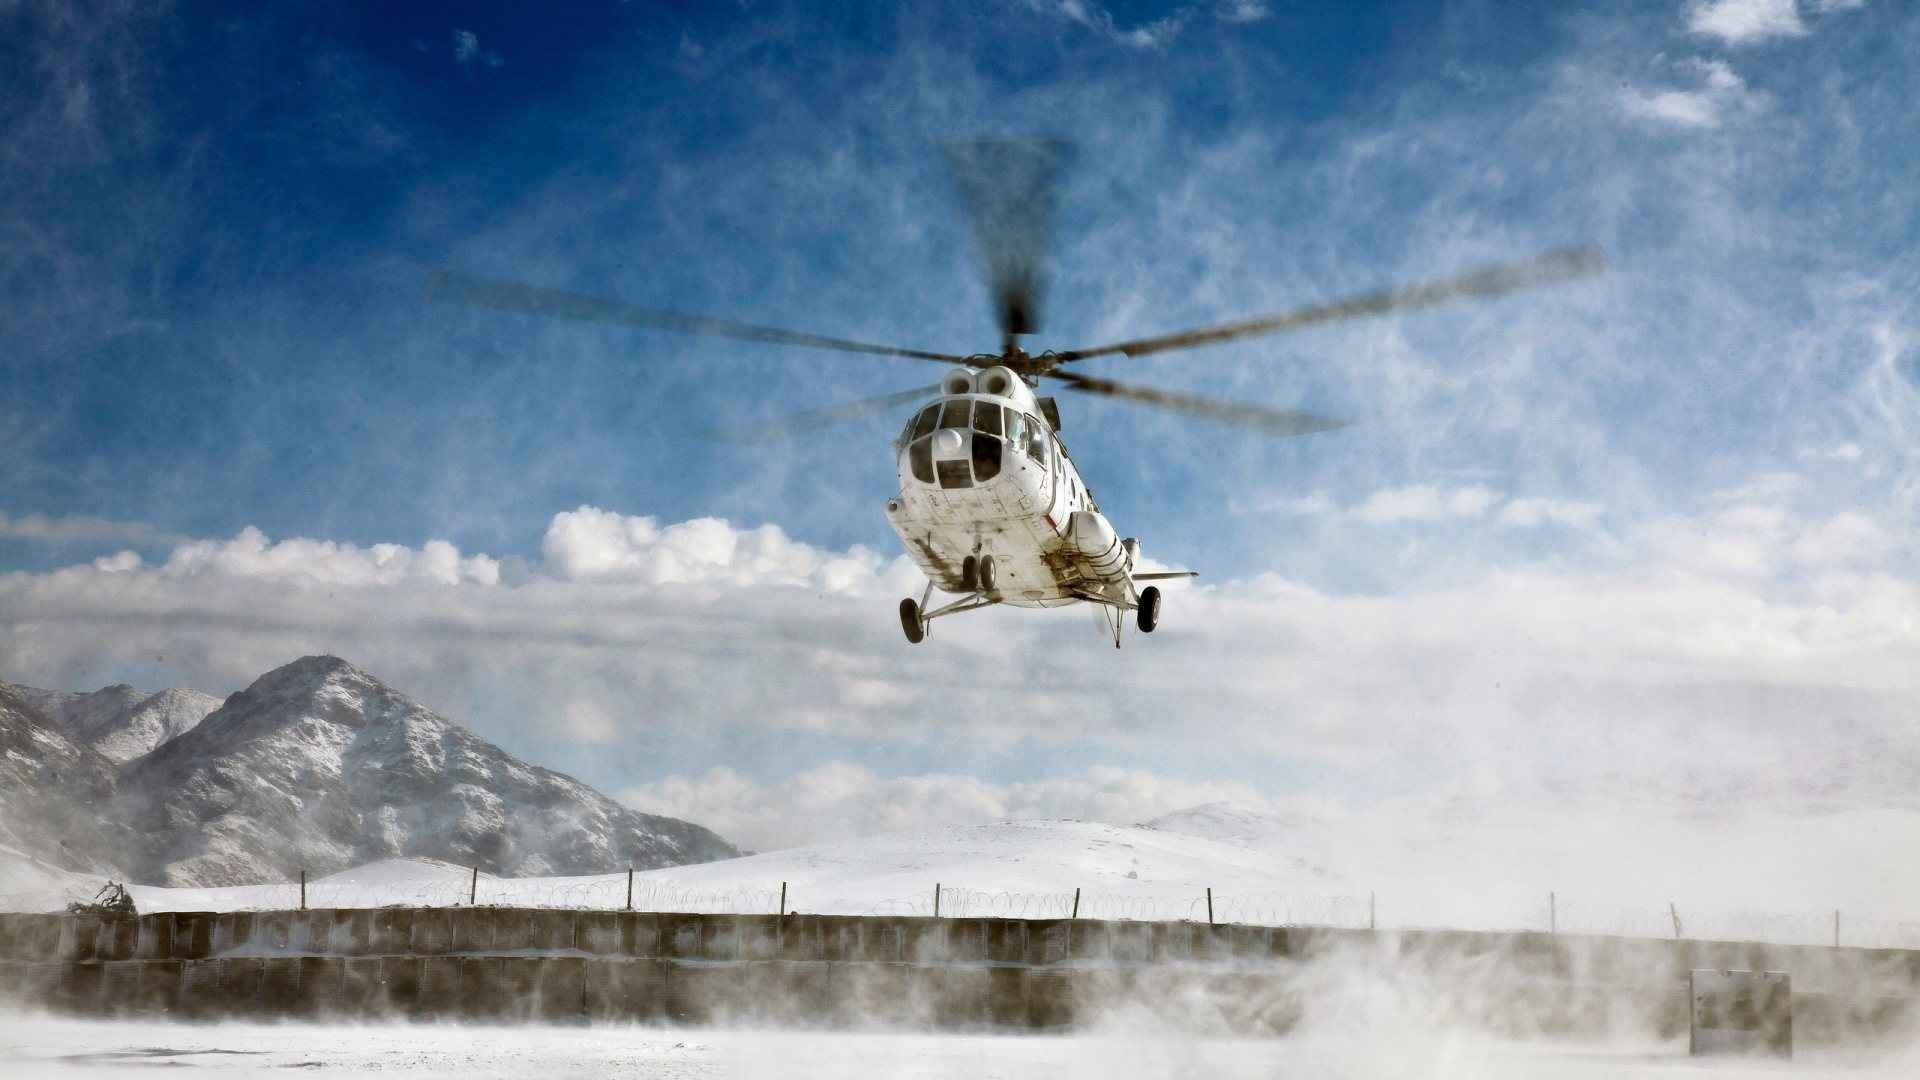 General 1920x1080 aircraft depth of field helicopters vehicle